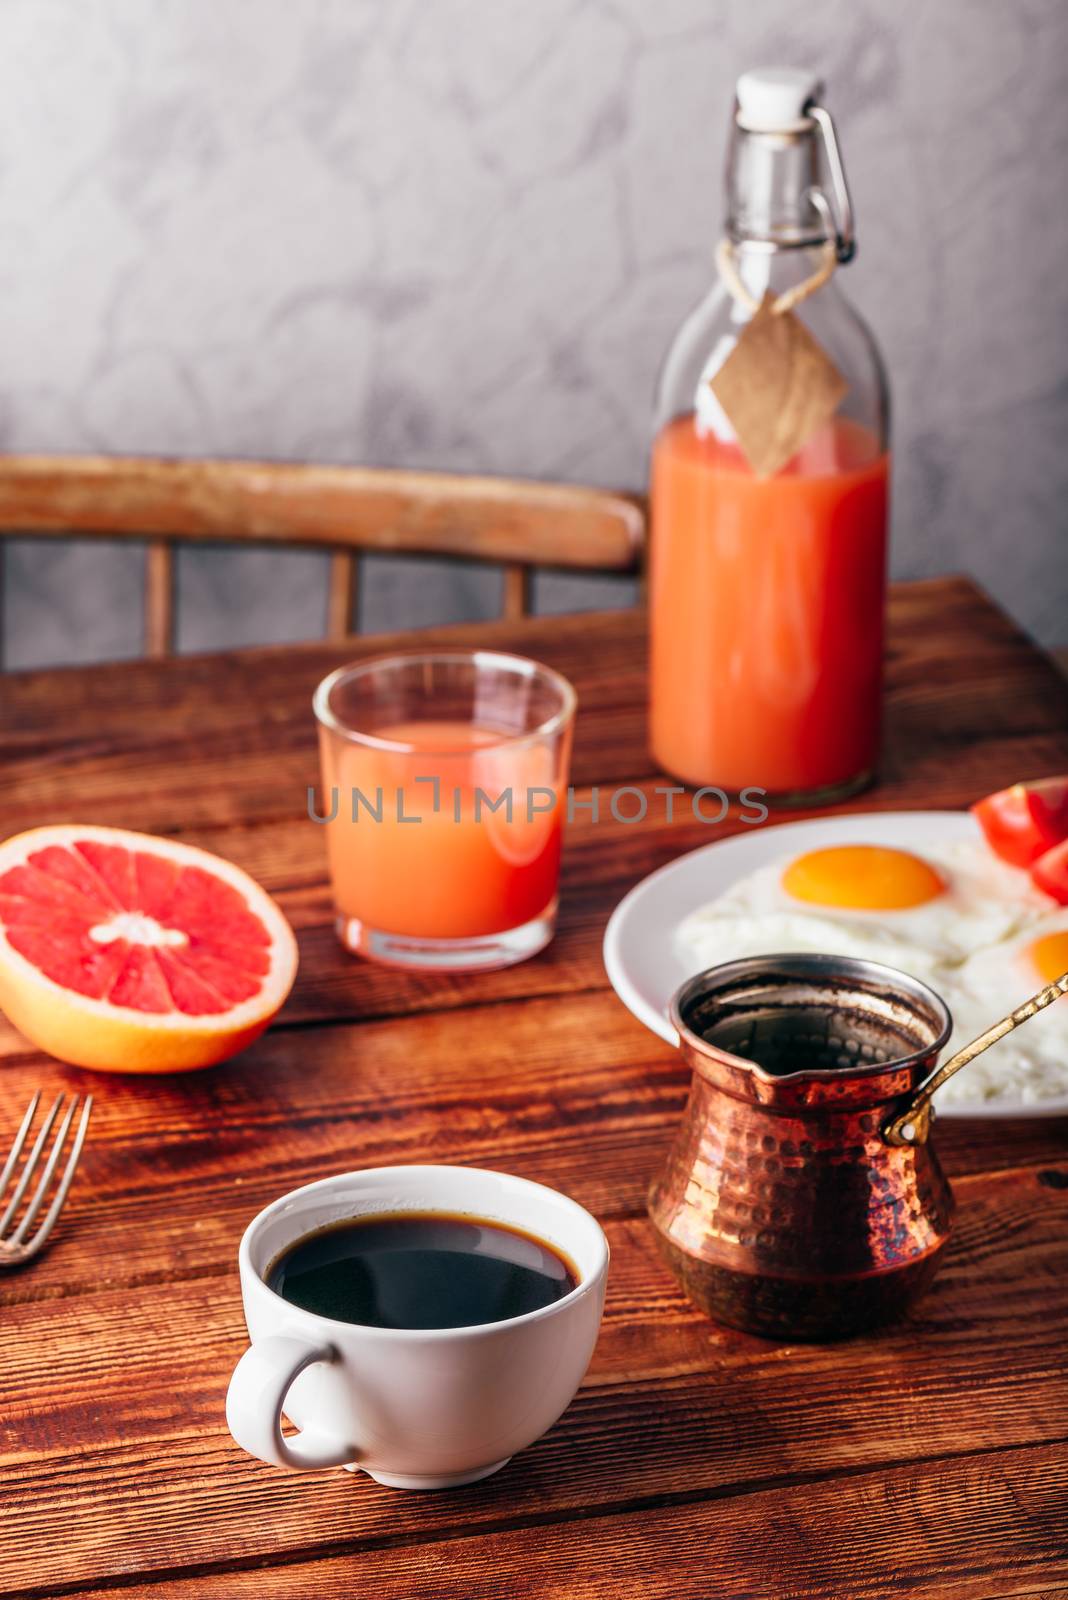 Breakfast with turkish coffee, fried eggs, juice and fruits over wooden table